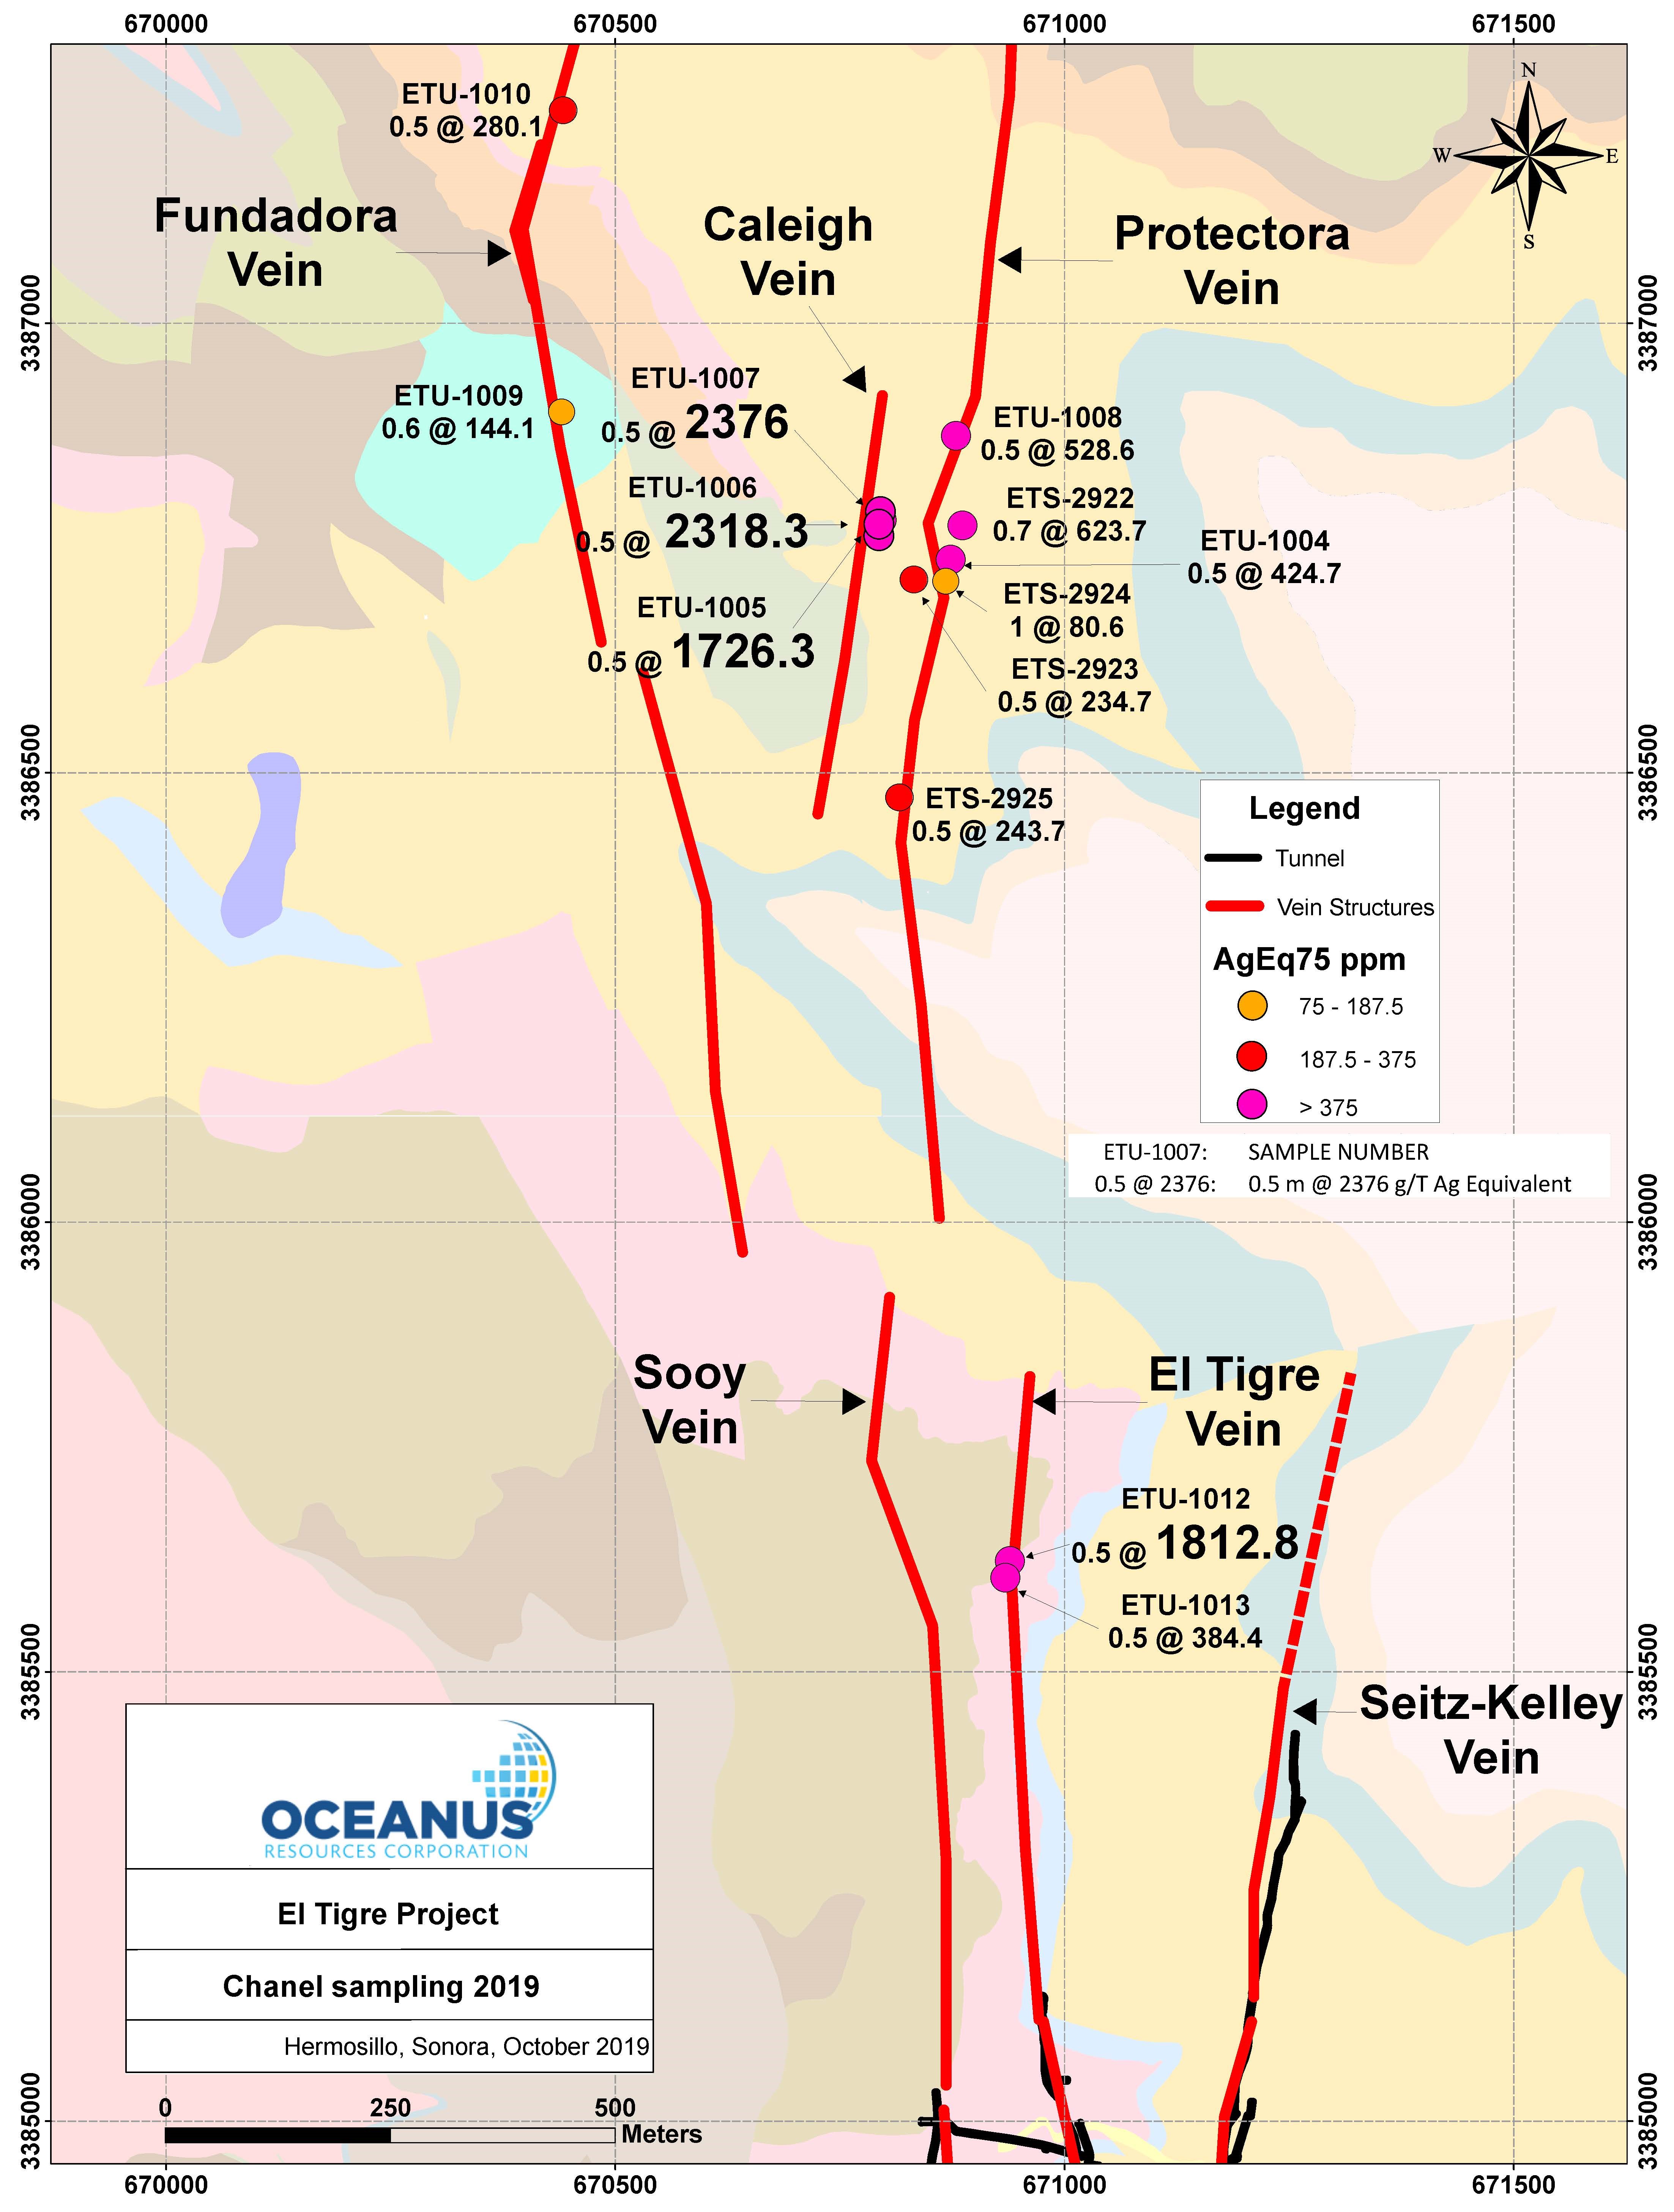 Oceanus Resources Corporation, Wednesday, November 6, 2019, Press release picture